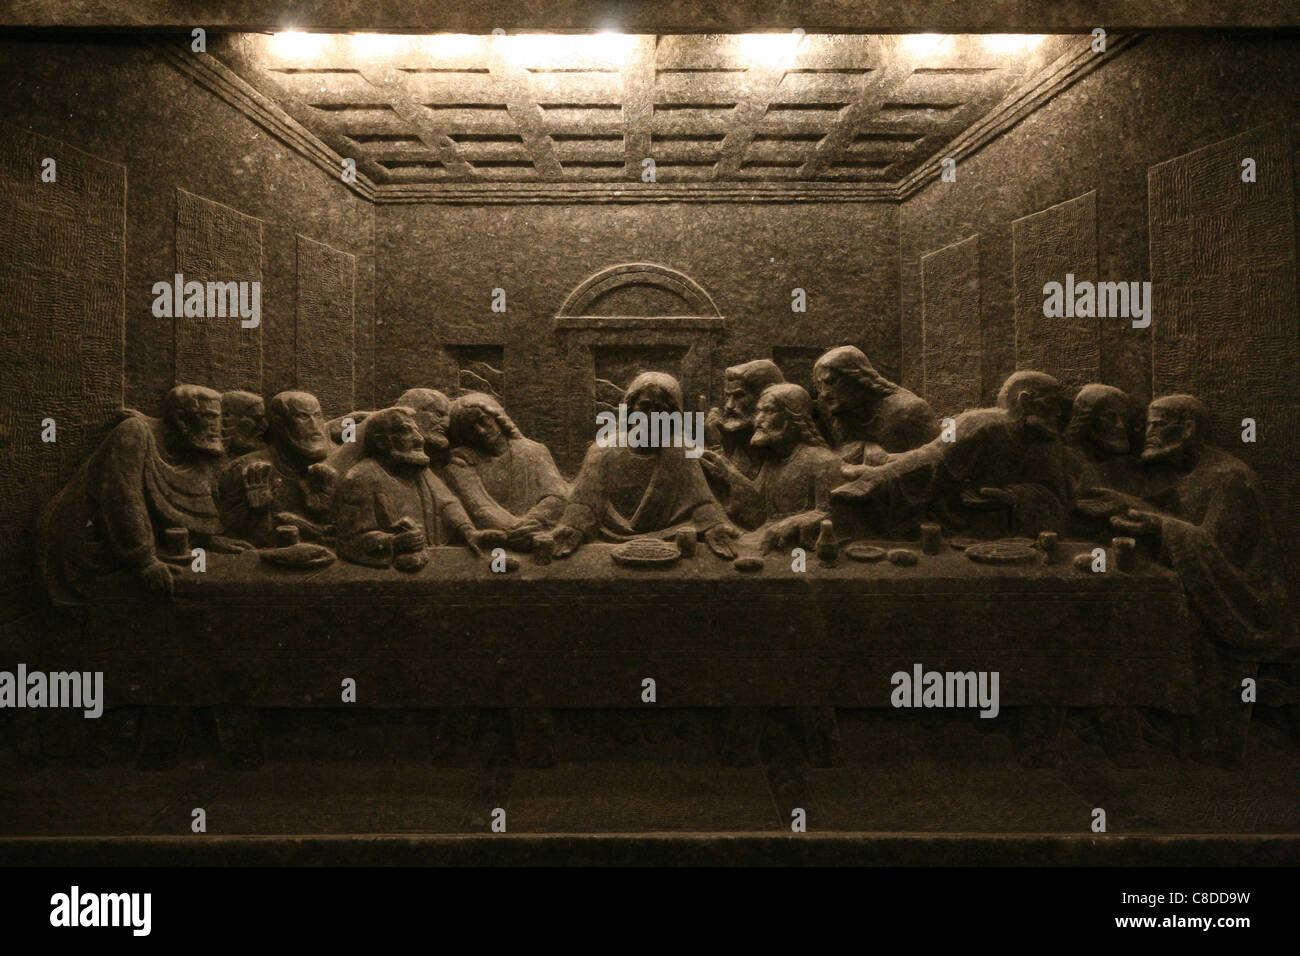 Last Supper. A relief carved in rock salt in the Saint Kinga’s Chamber in the Wieliczka Salt Mine near Krakow, Poland. Stock Photo